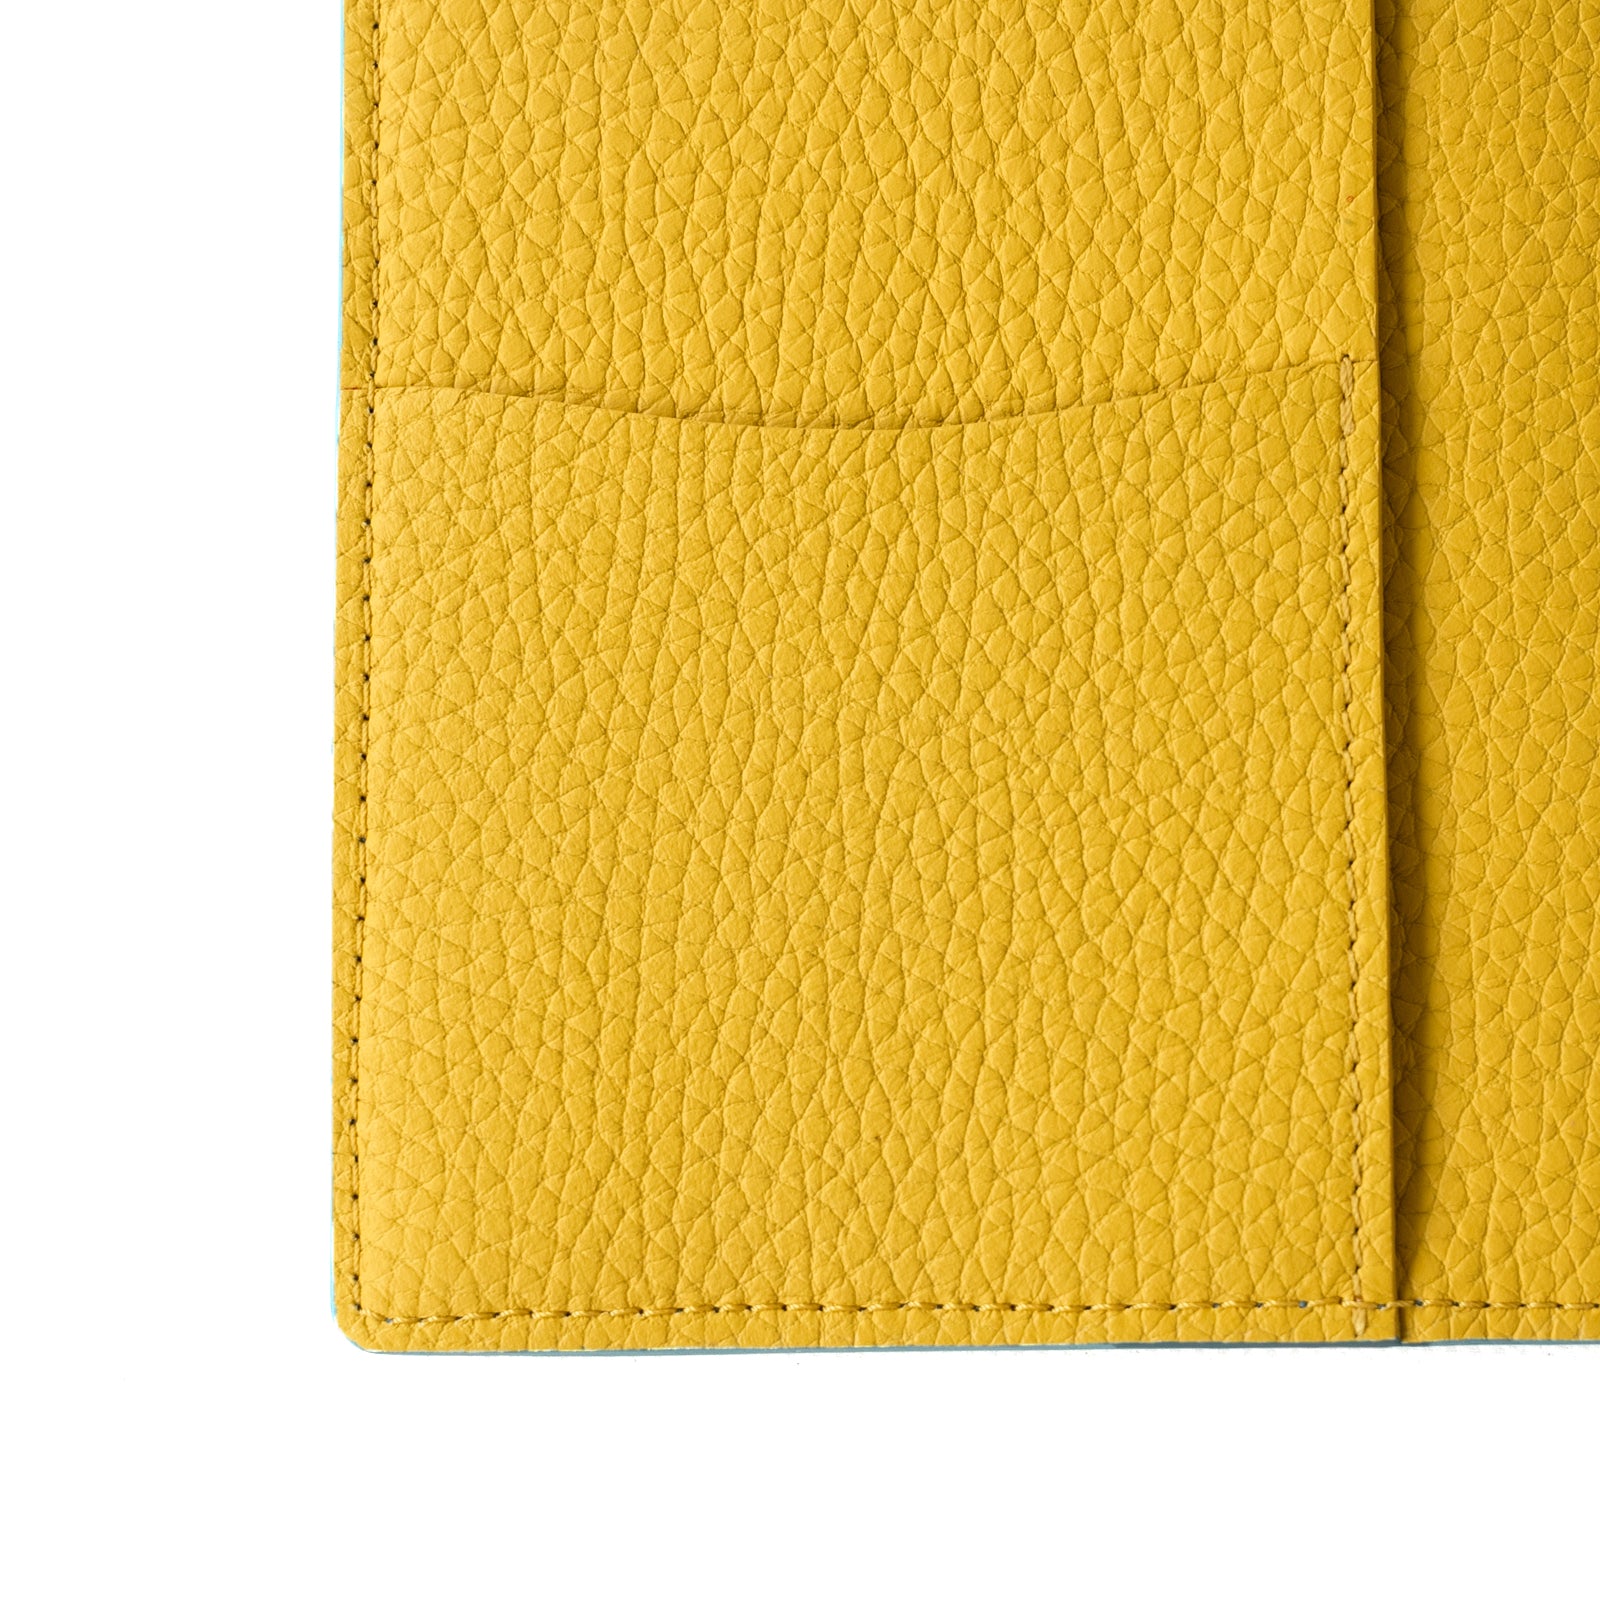 [Color order] A6 size notebook cover Taurillon Clemence x Cuir Mash 